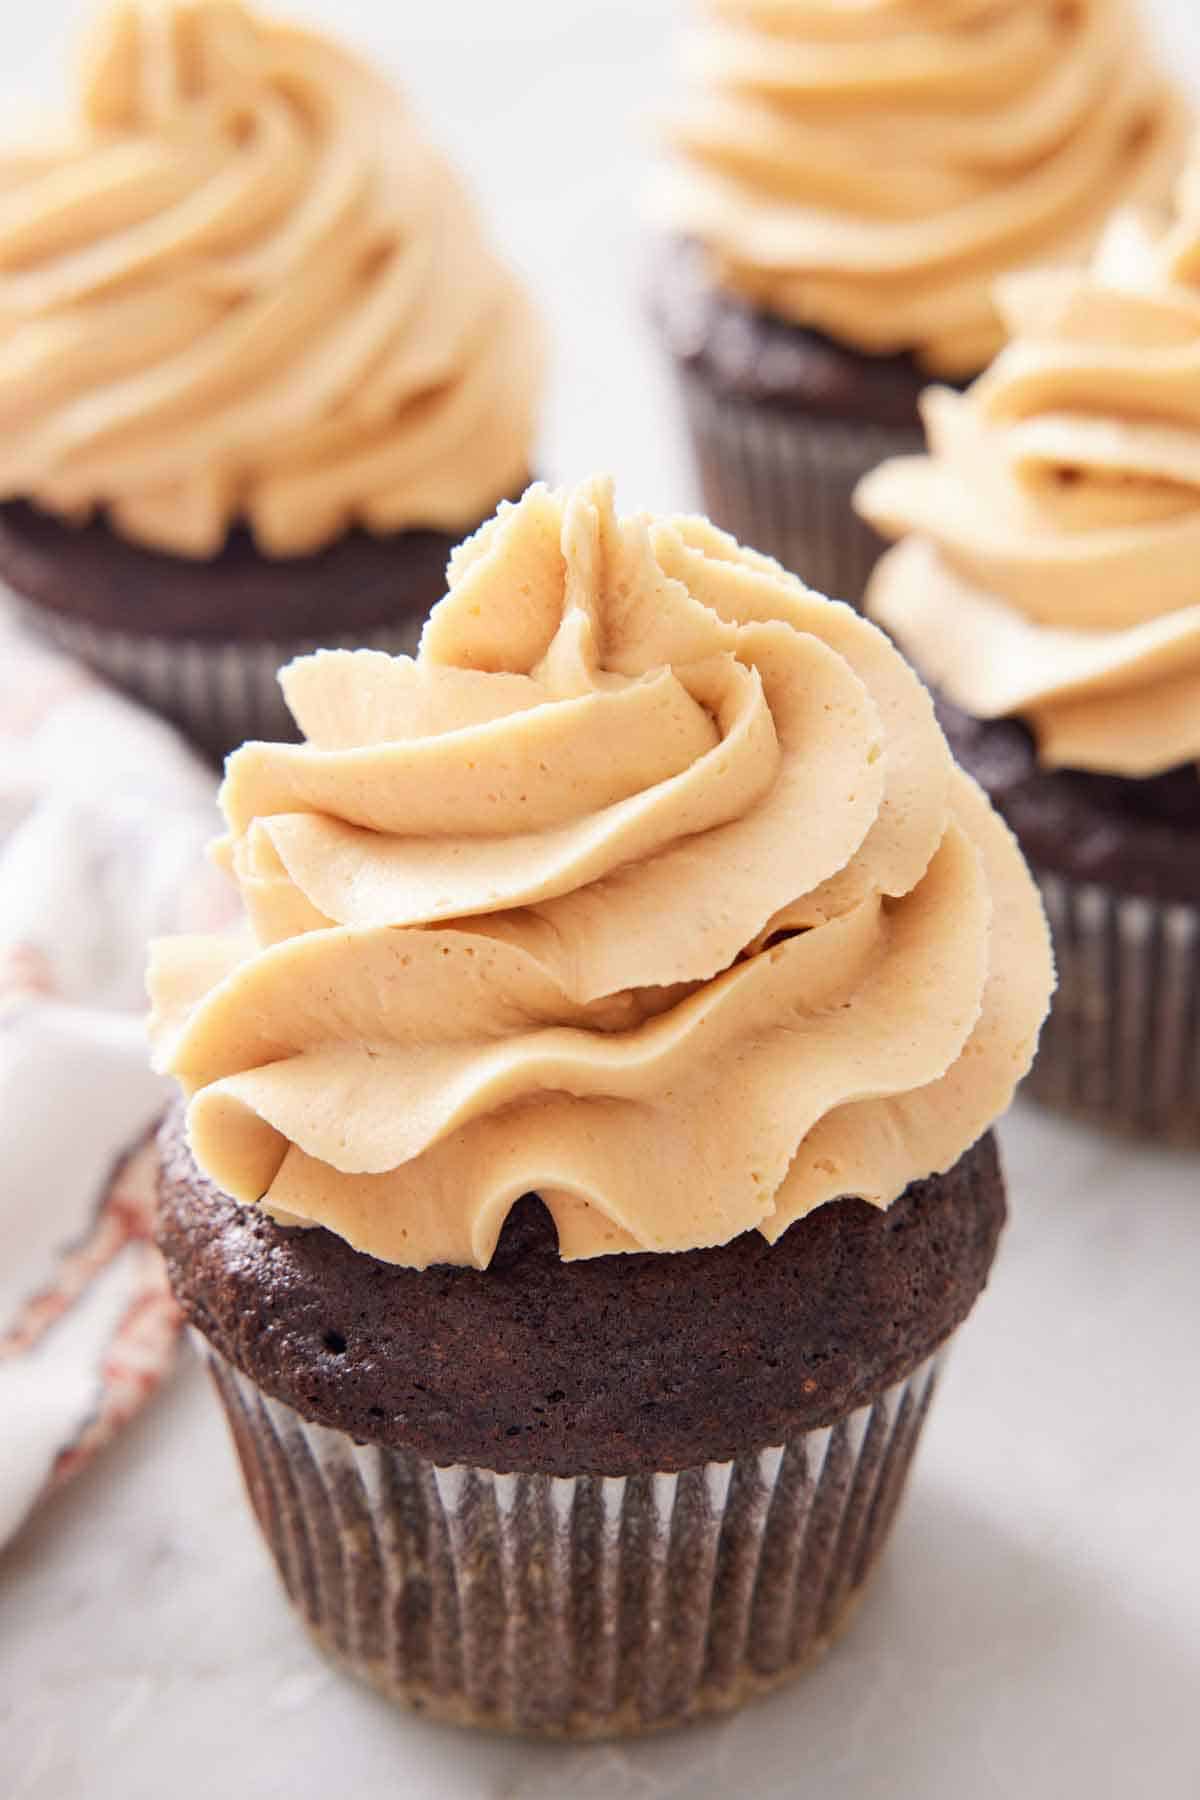 A chocolate cupcake with peanut butter frosting on top with more in the background.